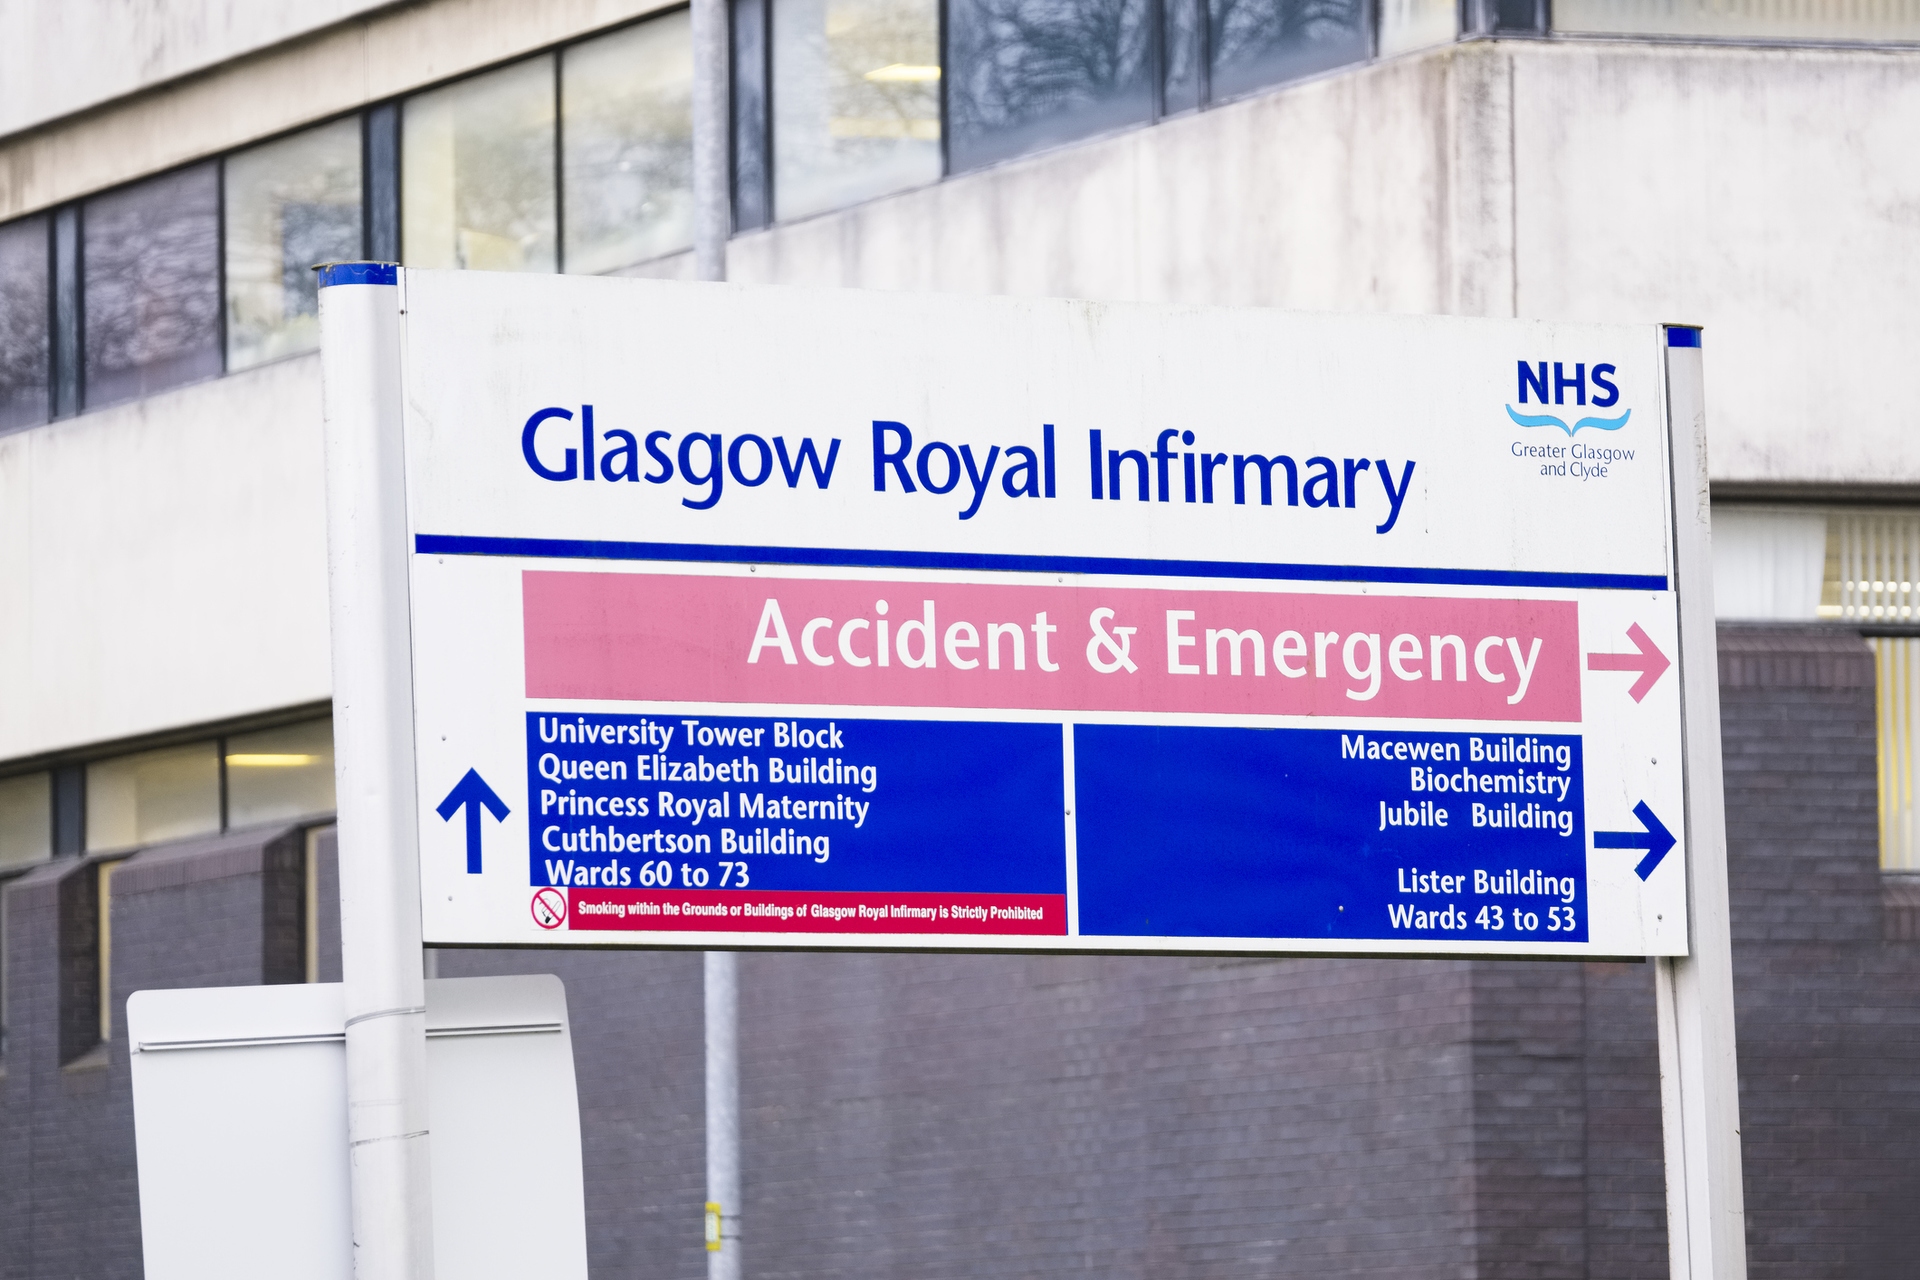 Glasgow Royal Infirmary's burns and plastics wards will allow up to two visitors at a time